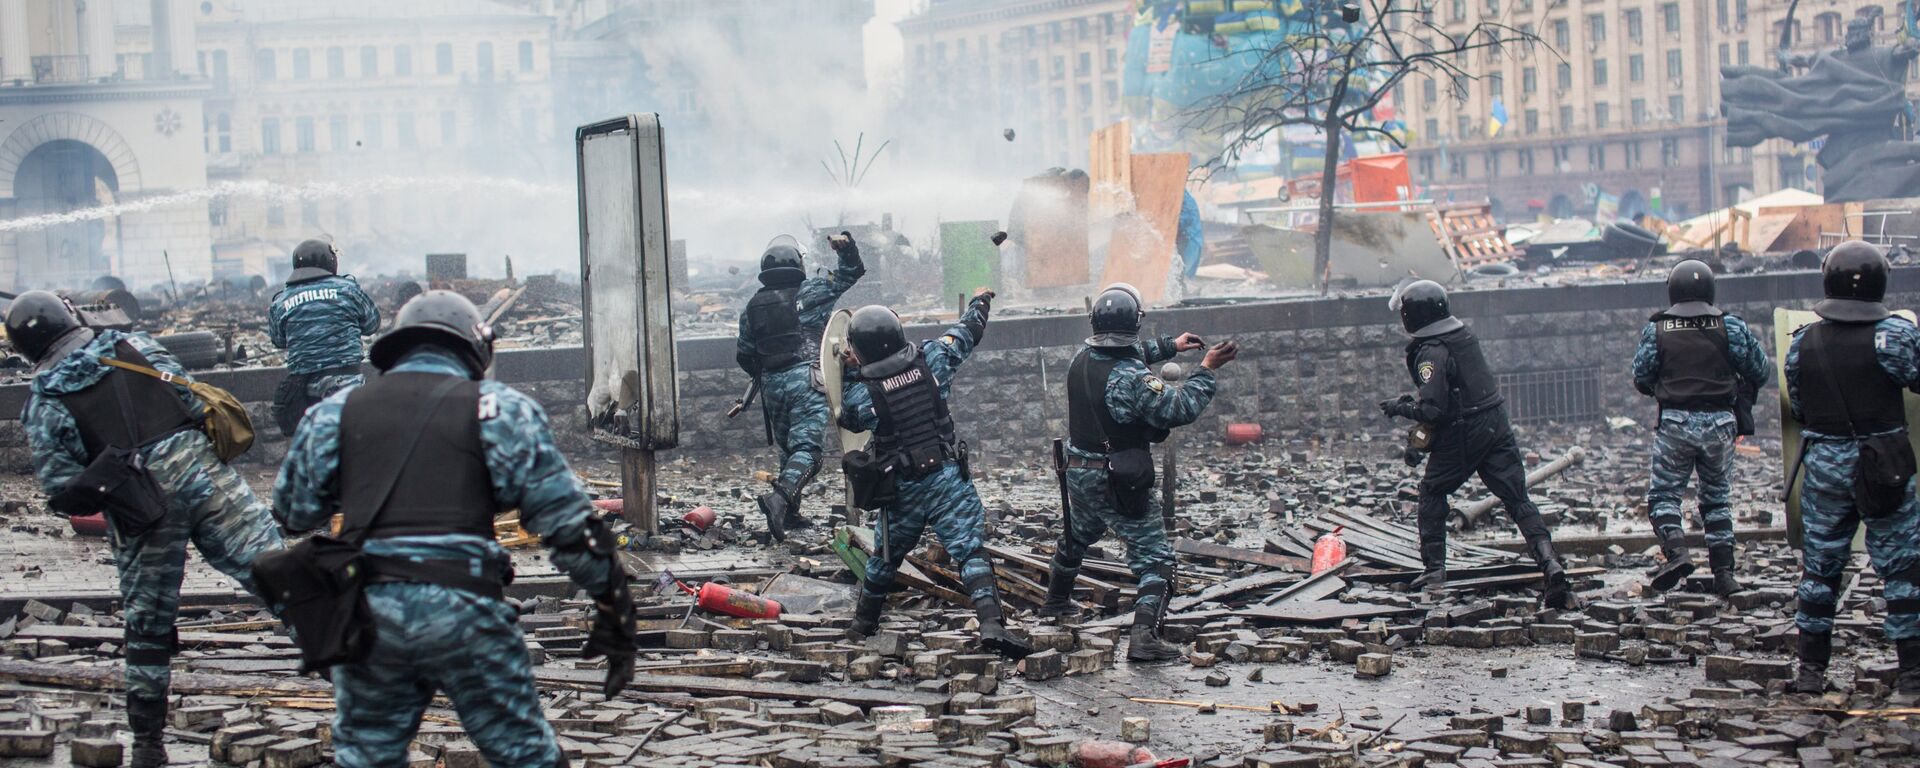 Police officers are seen on Maidan Nezalezhnosti square in Kiev, where clashes began between protesters and the police. (File) - Sputnik International, 1920, 20.02.2018